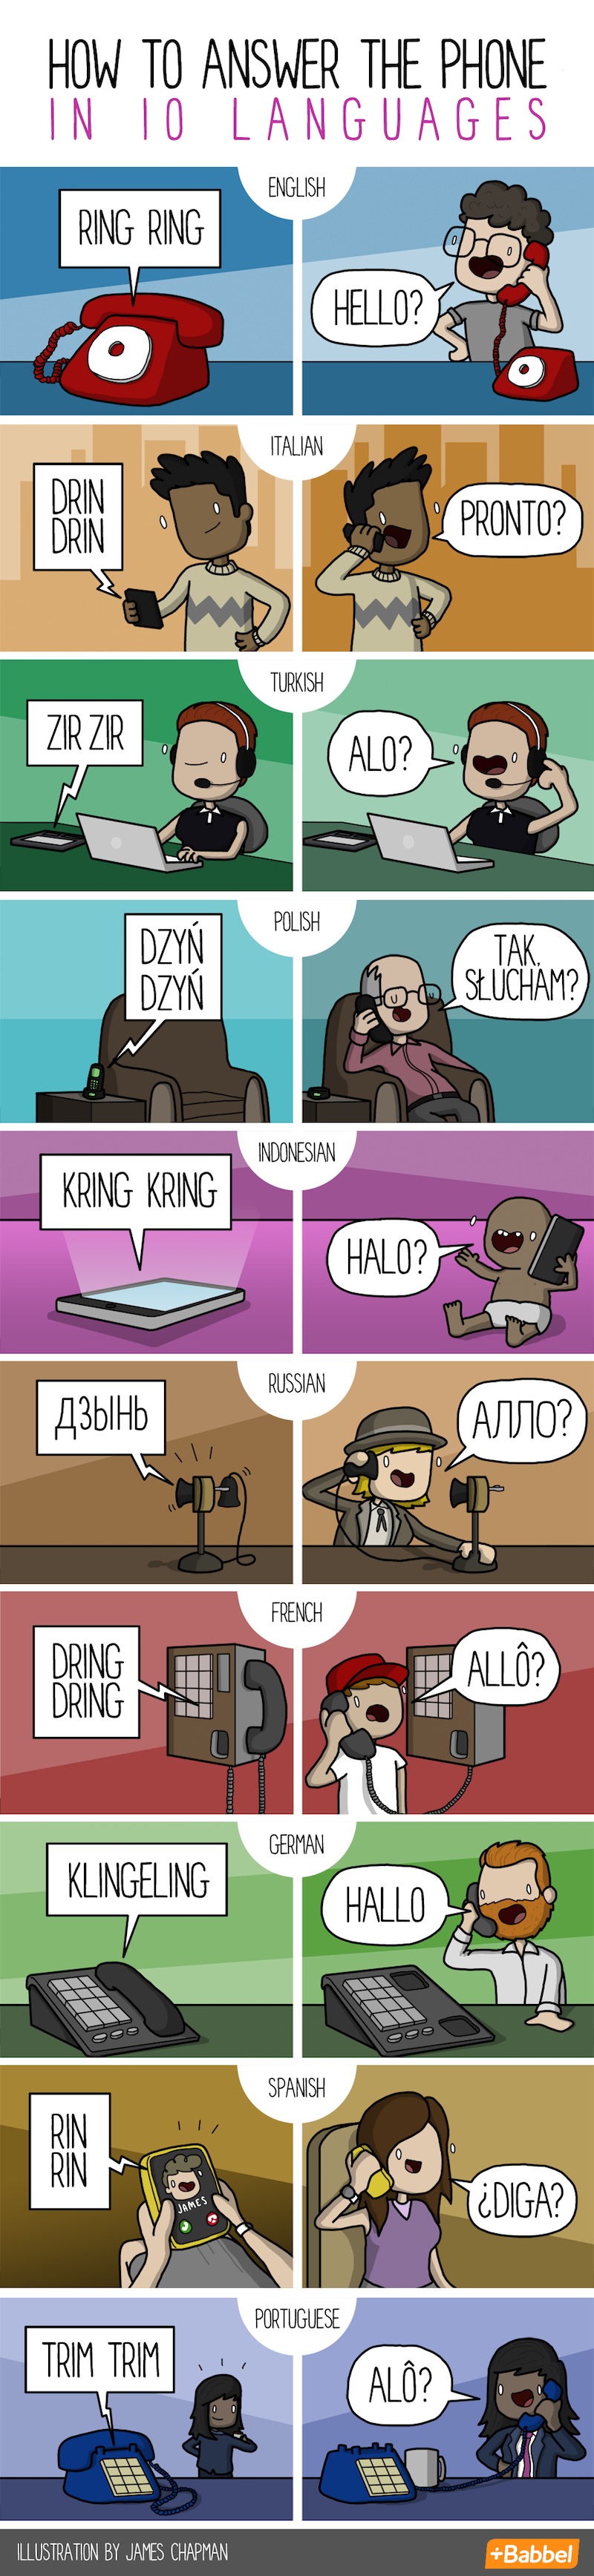 How to Answer the Phone in Different Languages